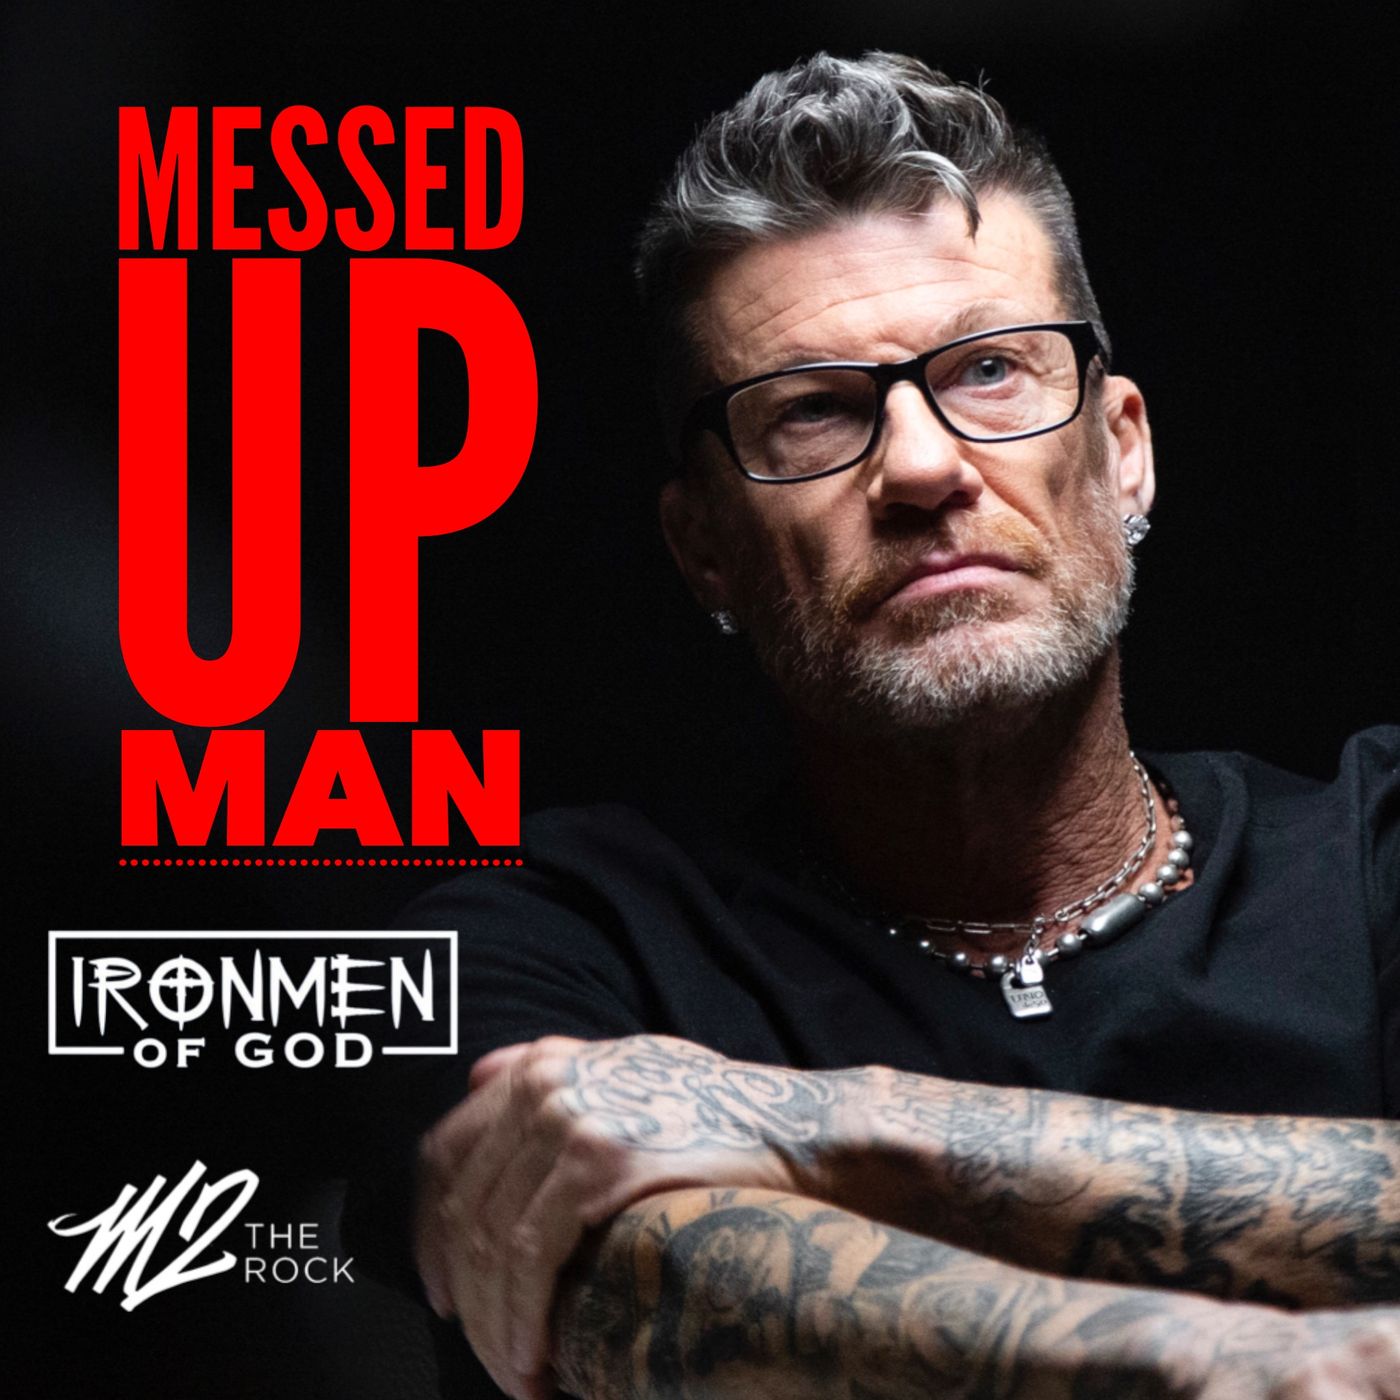 MESSED UP MAN - M2 THE ROCK - IRONMEN OF GOD